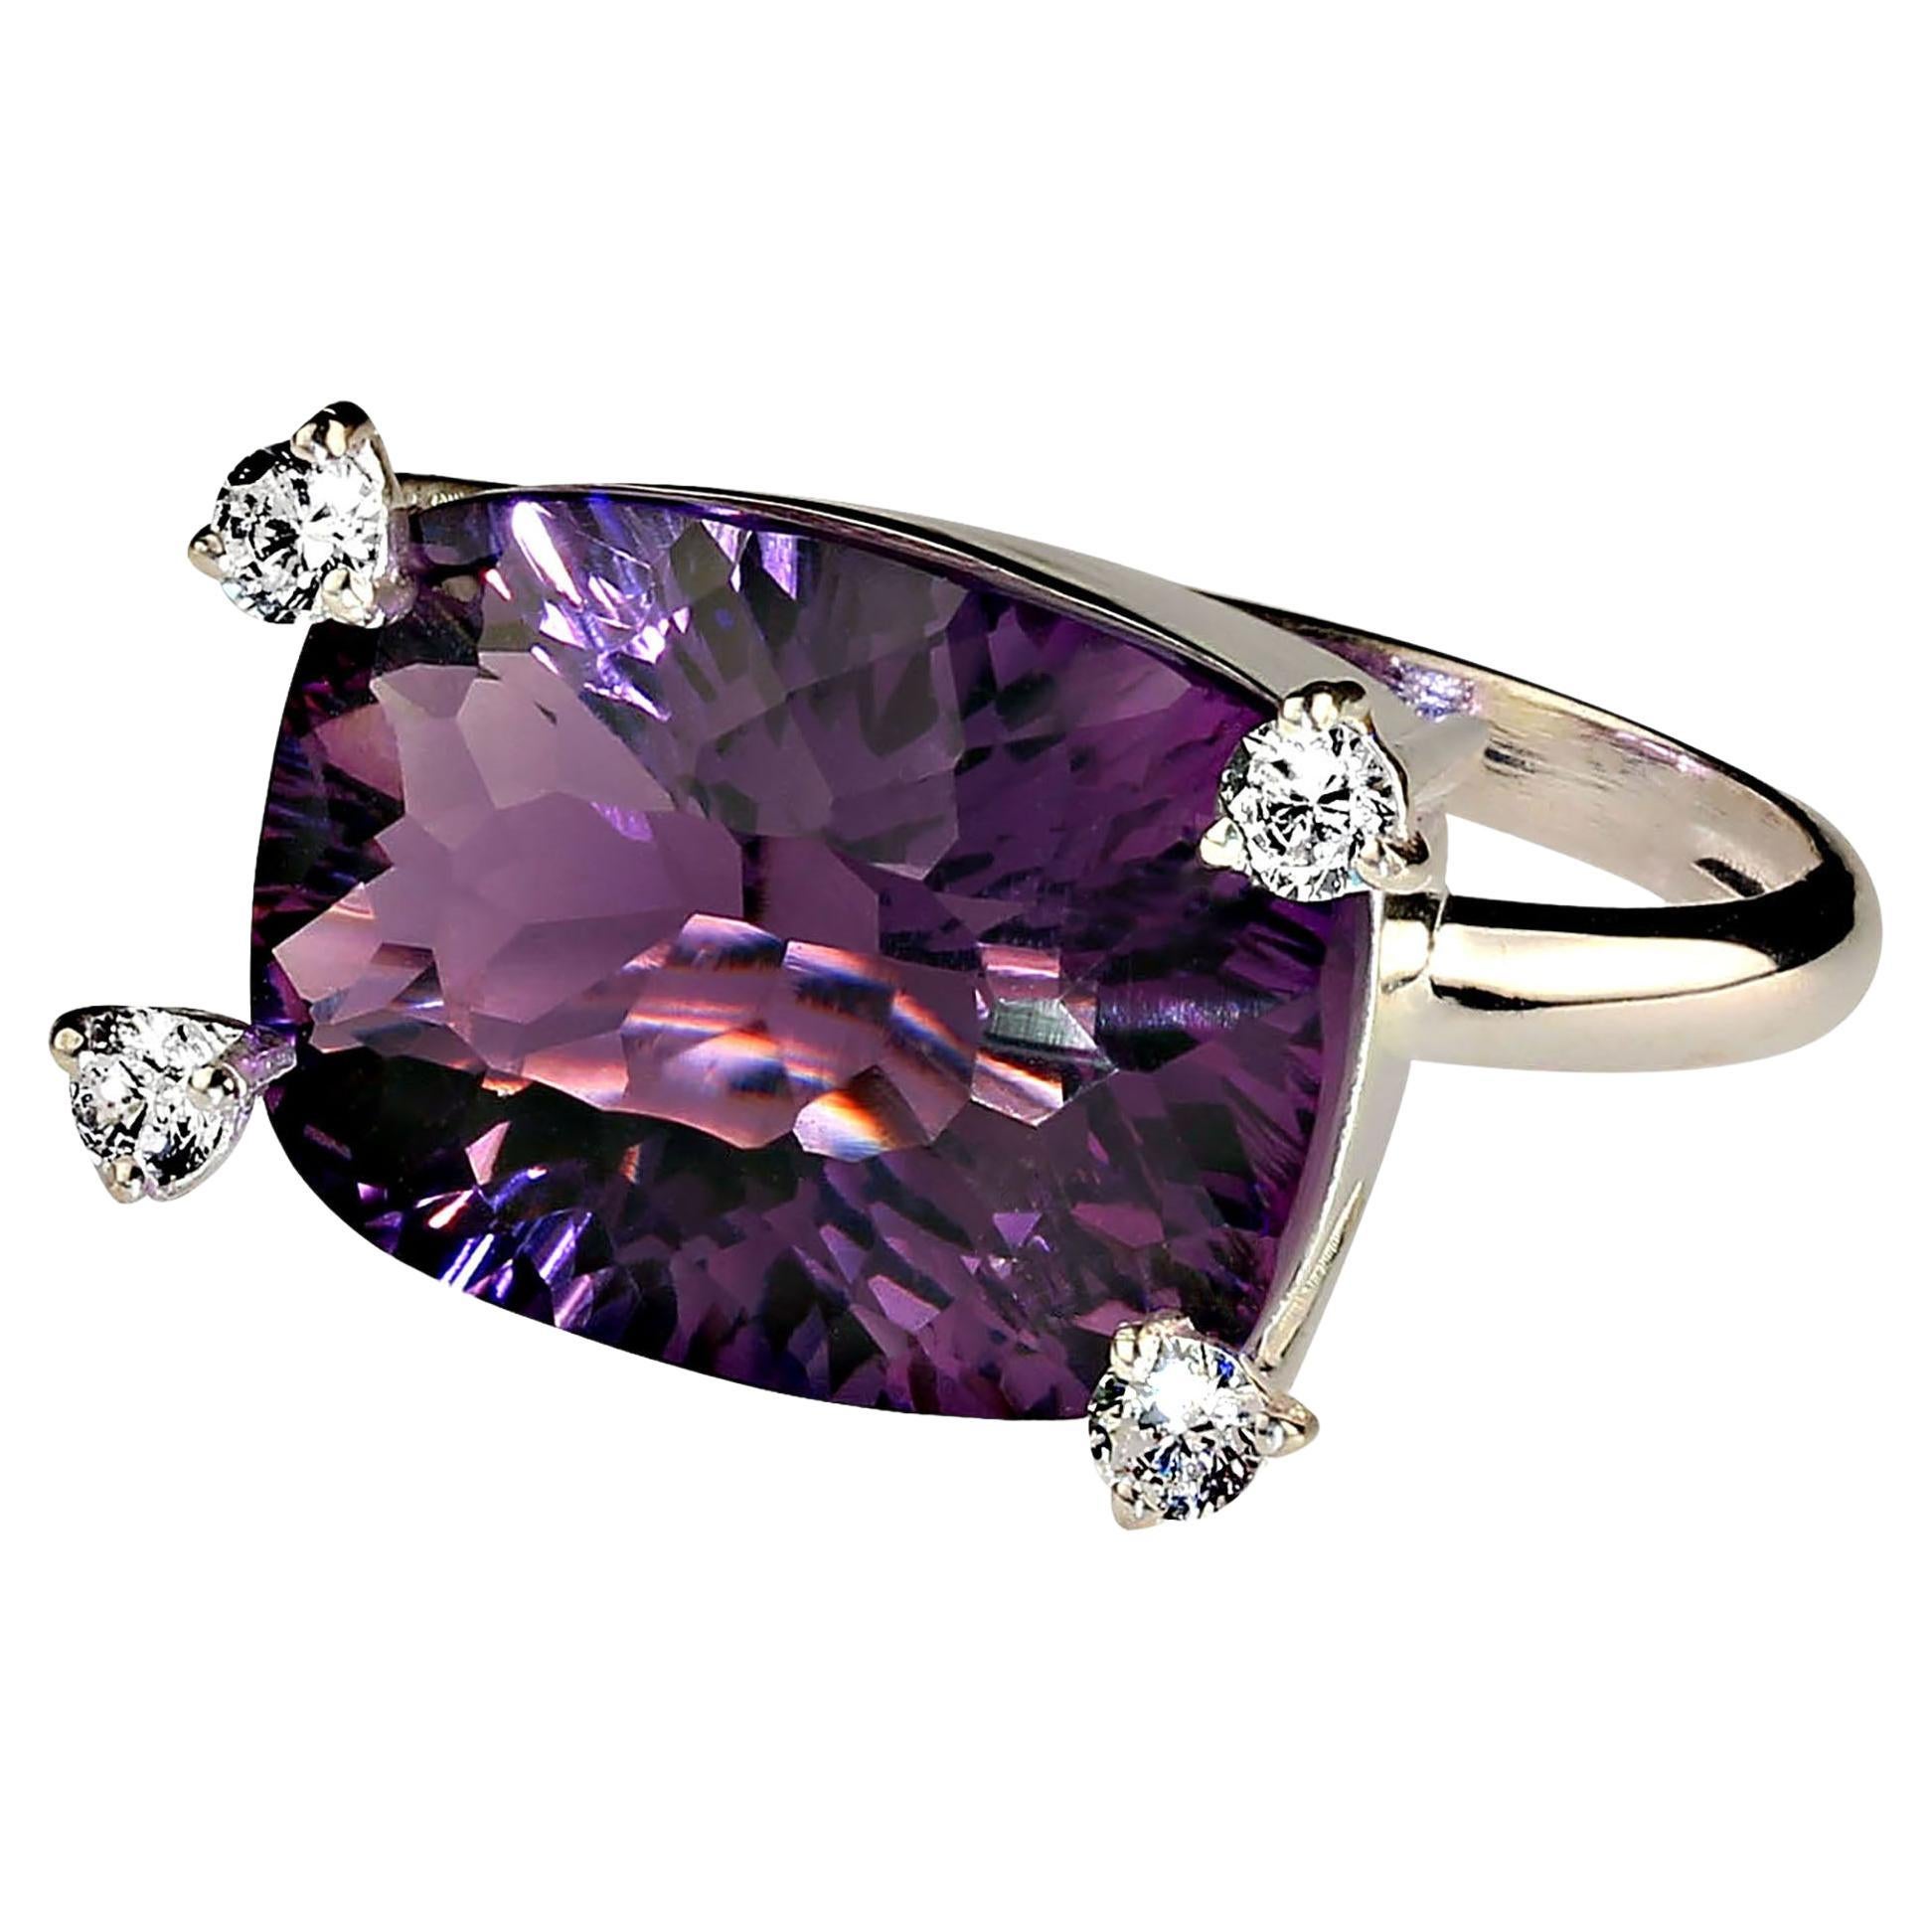 Artisan AJD Contemporary Scintillating Amethyst and White Zircon Ring For Sale